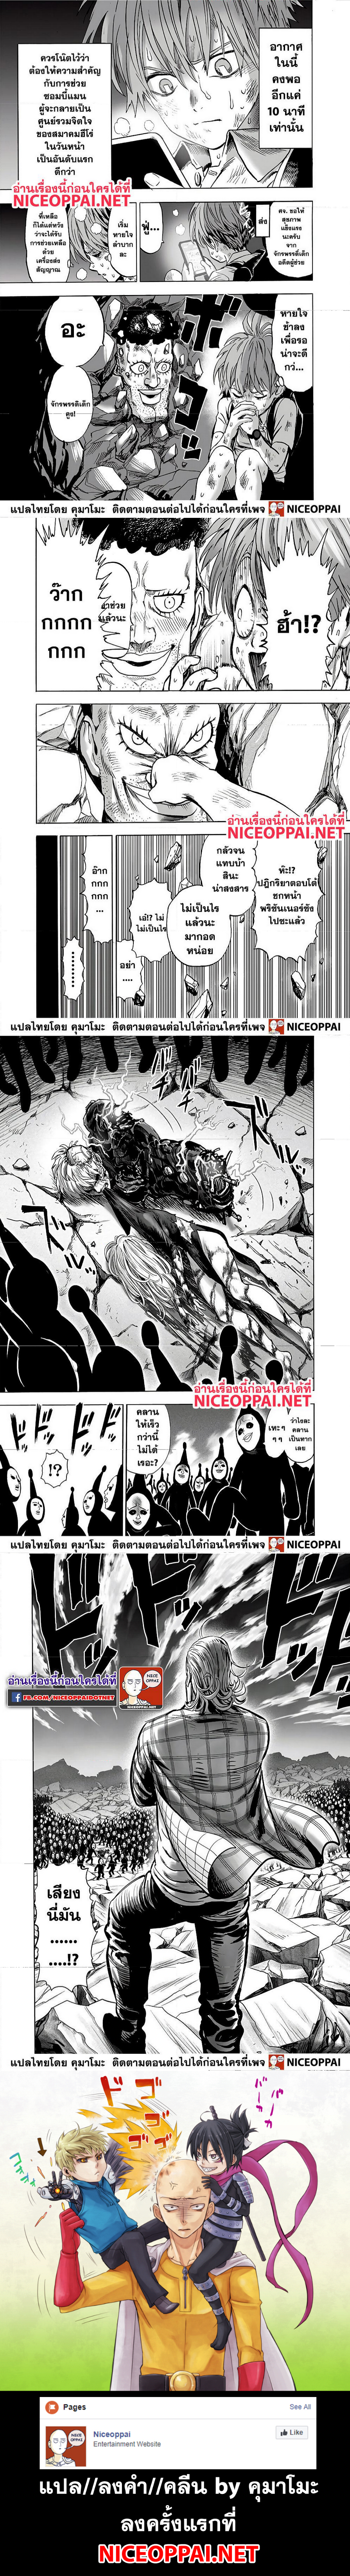 One Punch Man149 (7)